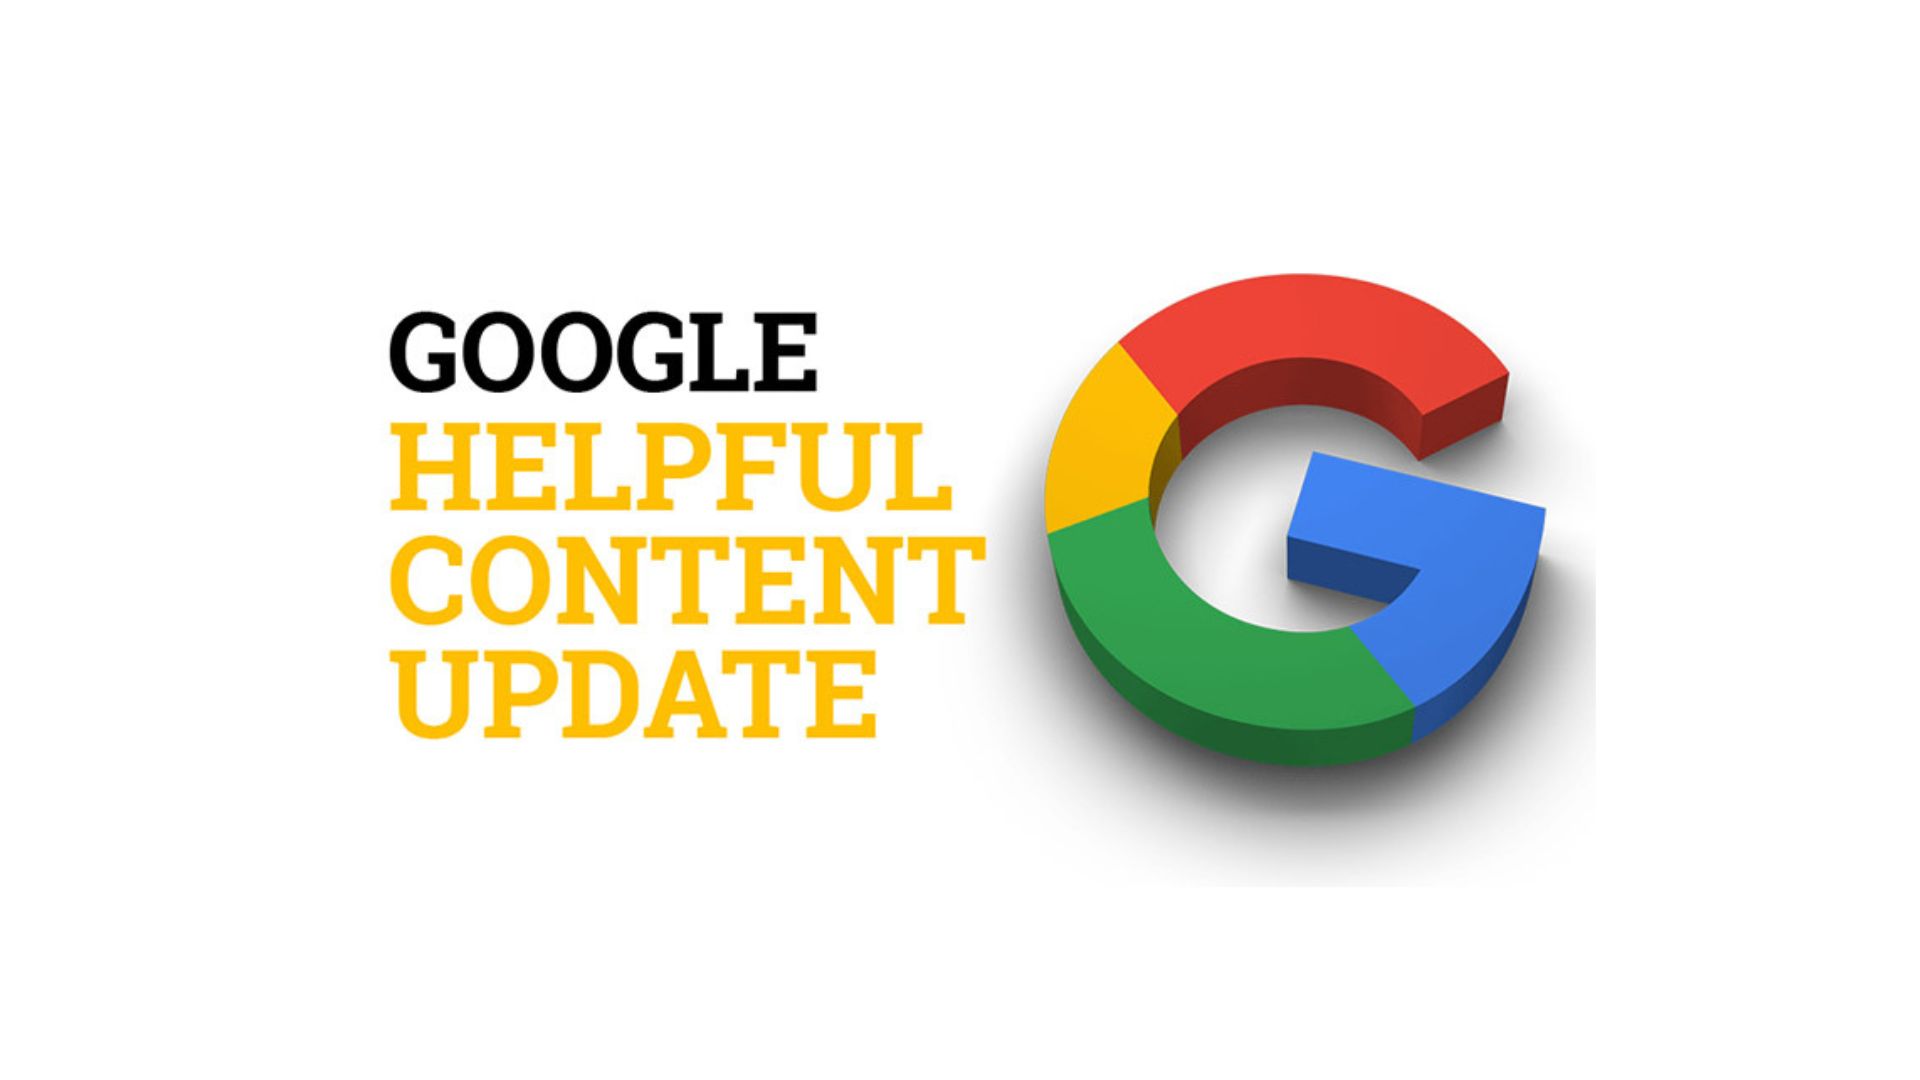 Google Helpful Content Update - What Does It Mean To You?